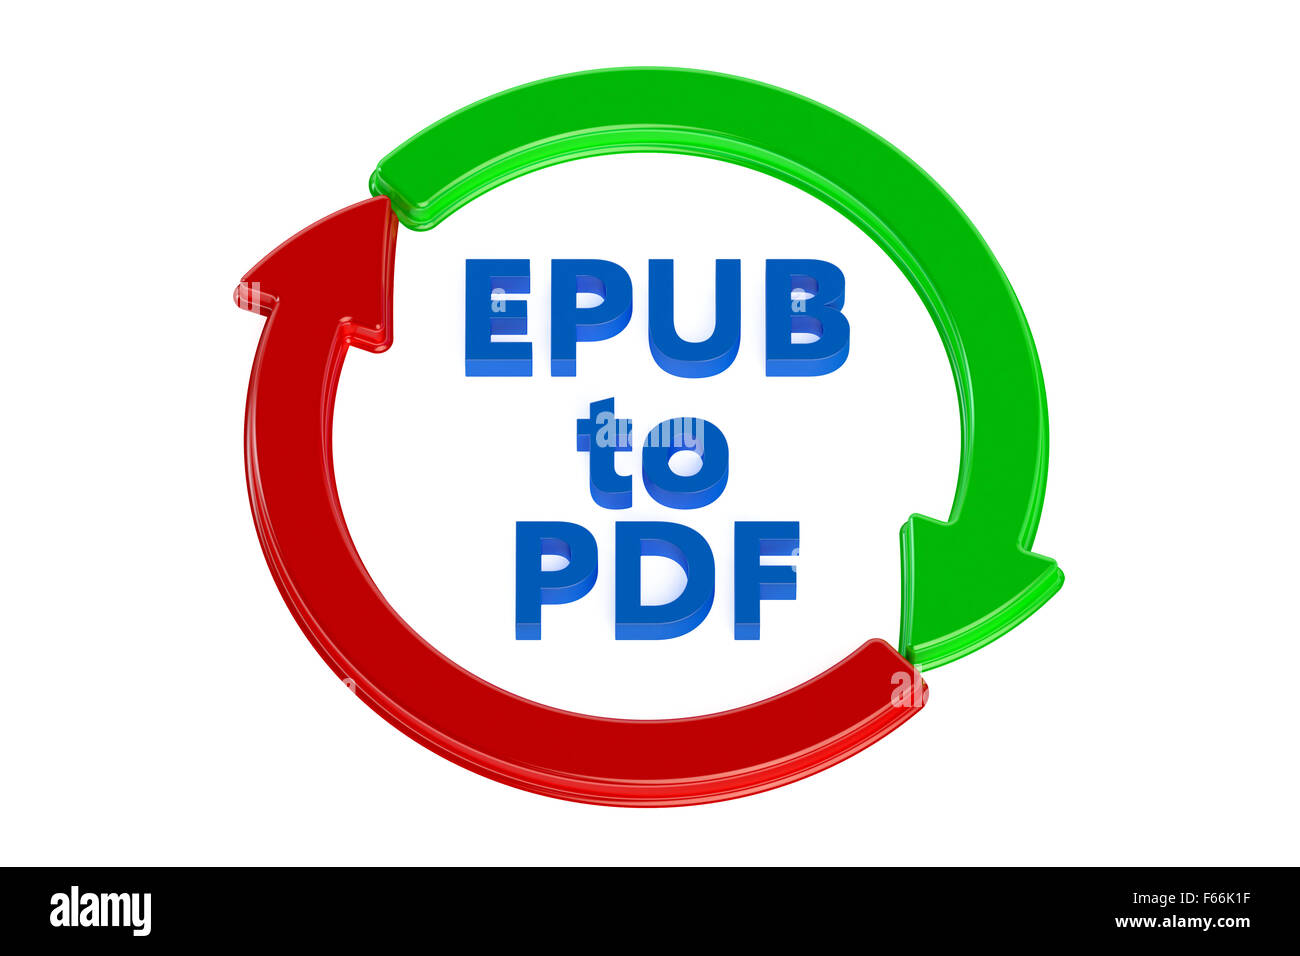 converting epub to pdf concept isolated on white background Stock Photo